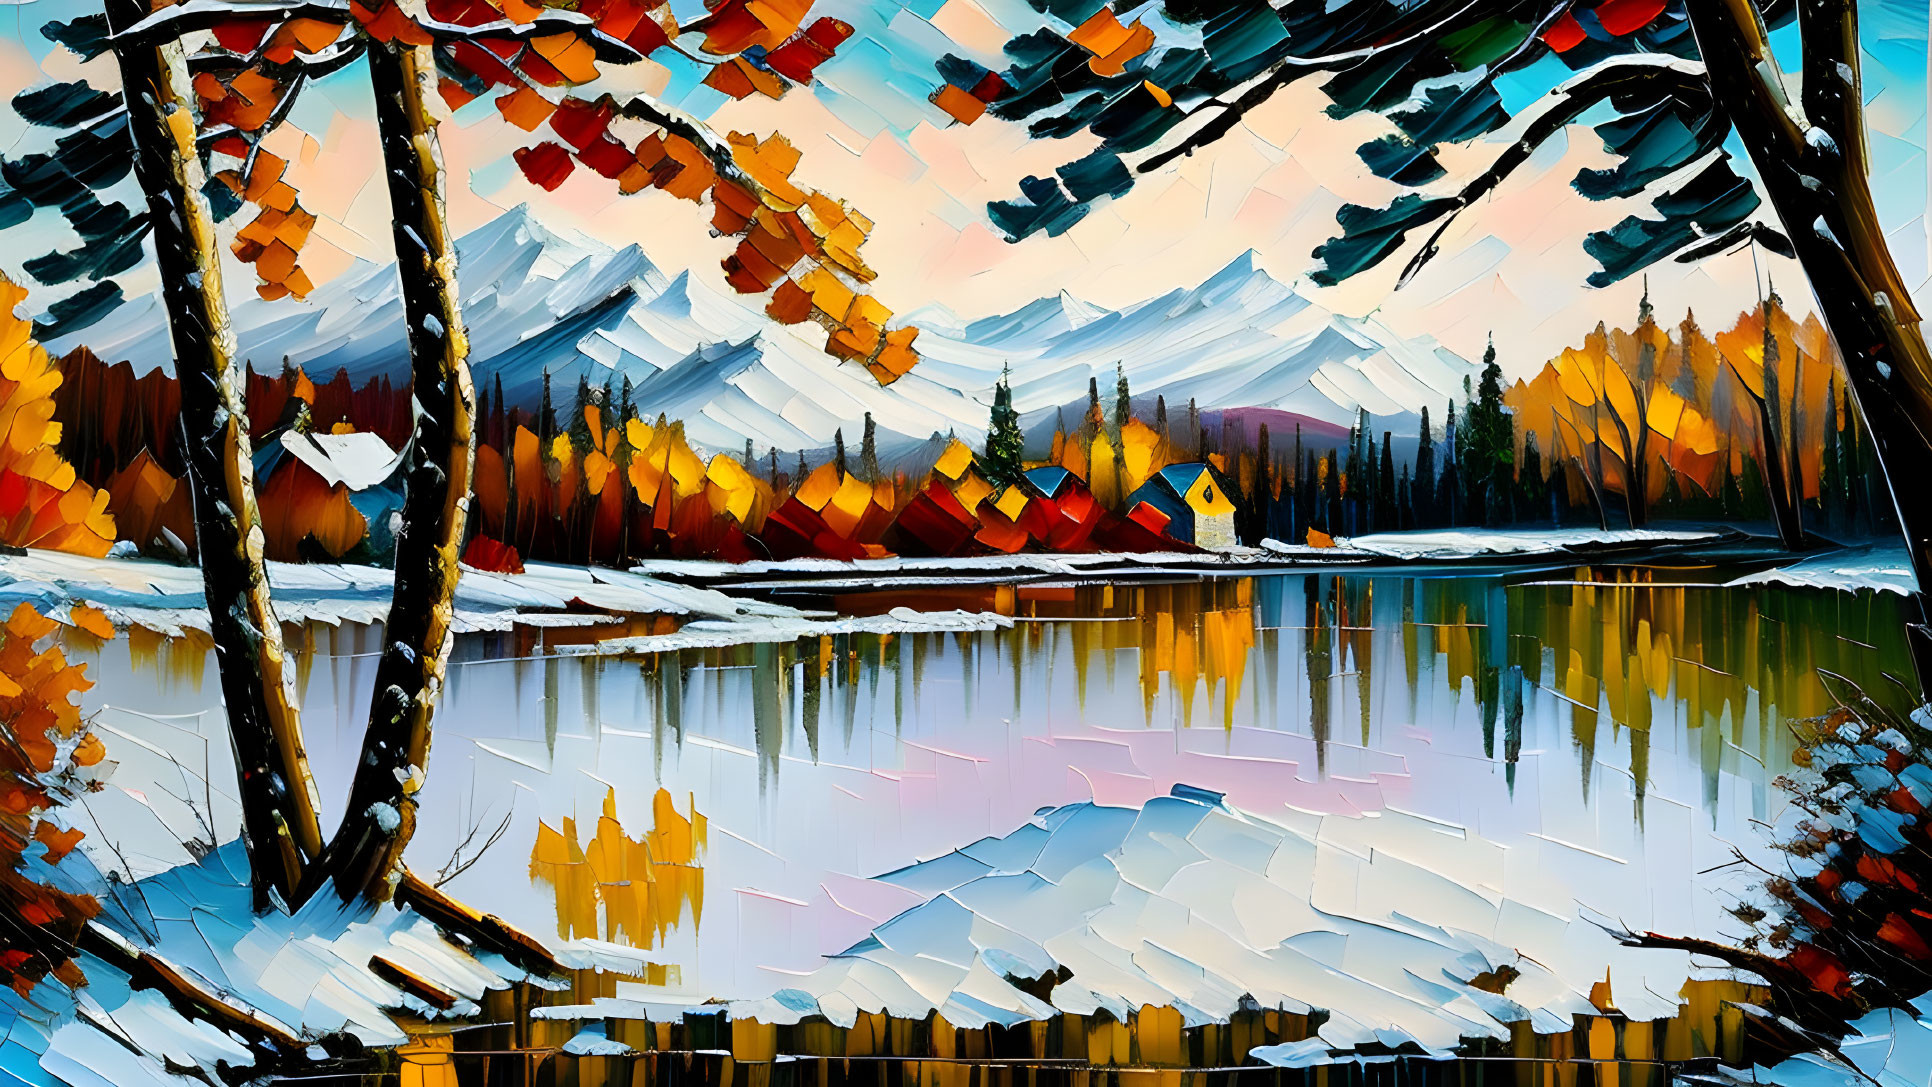 Serene lakeside painting with autumn trees, cabin, and mountains